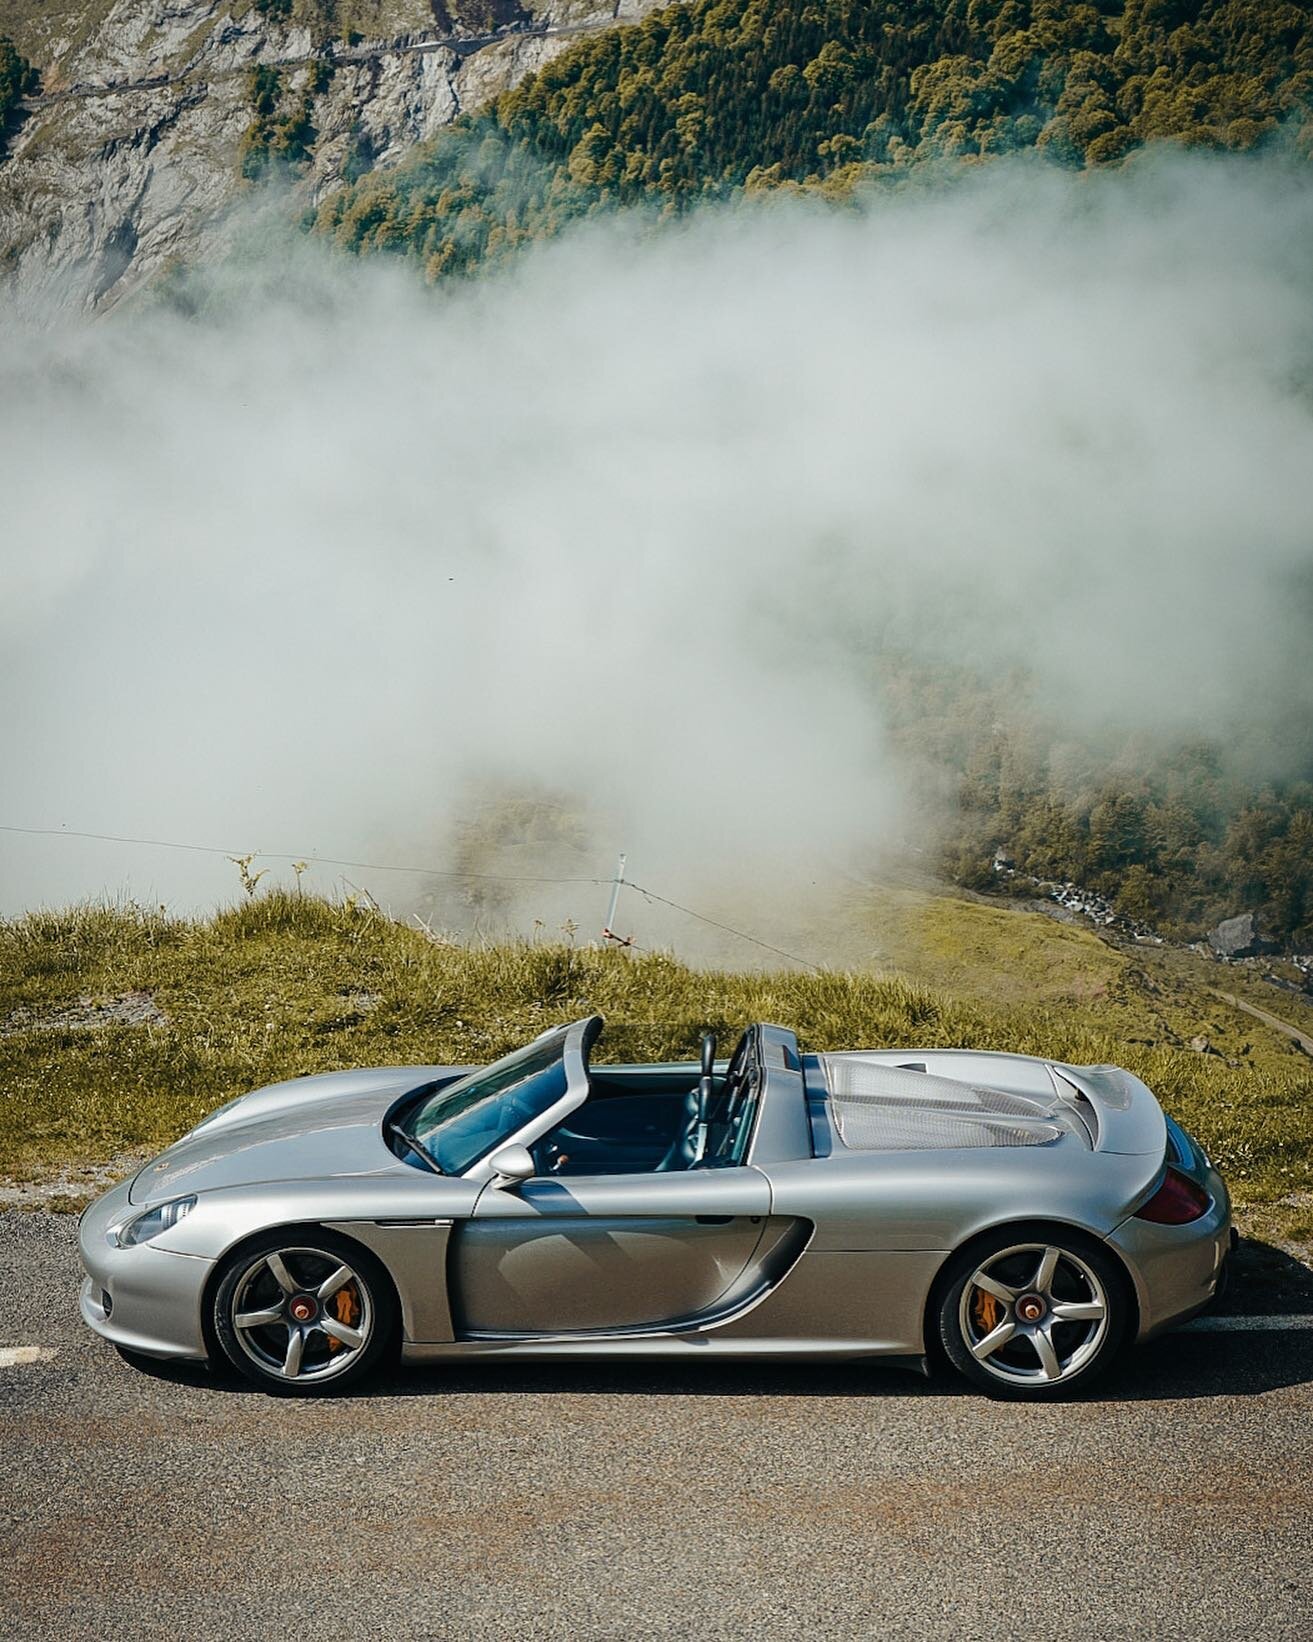 One of my favourite pictures I took of the Carrera GT last week. Such a treat to see one of these being used as intended. And the sound, oh the sound&hellip;
&bull;
@porsche @porsche.museum #CarreraGT #Porsche #PyreneesGrantour @gt.boulevard